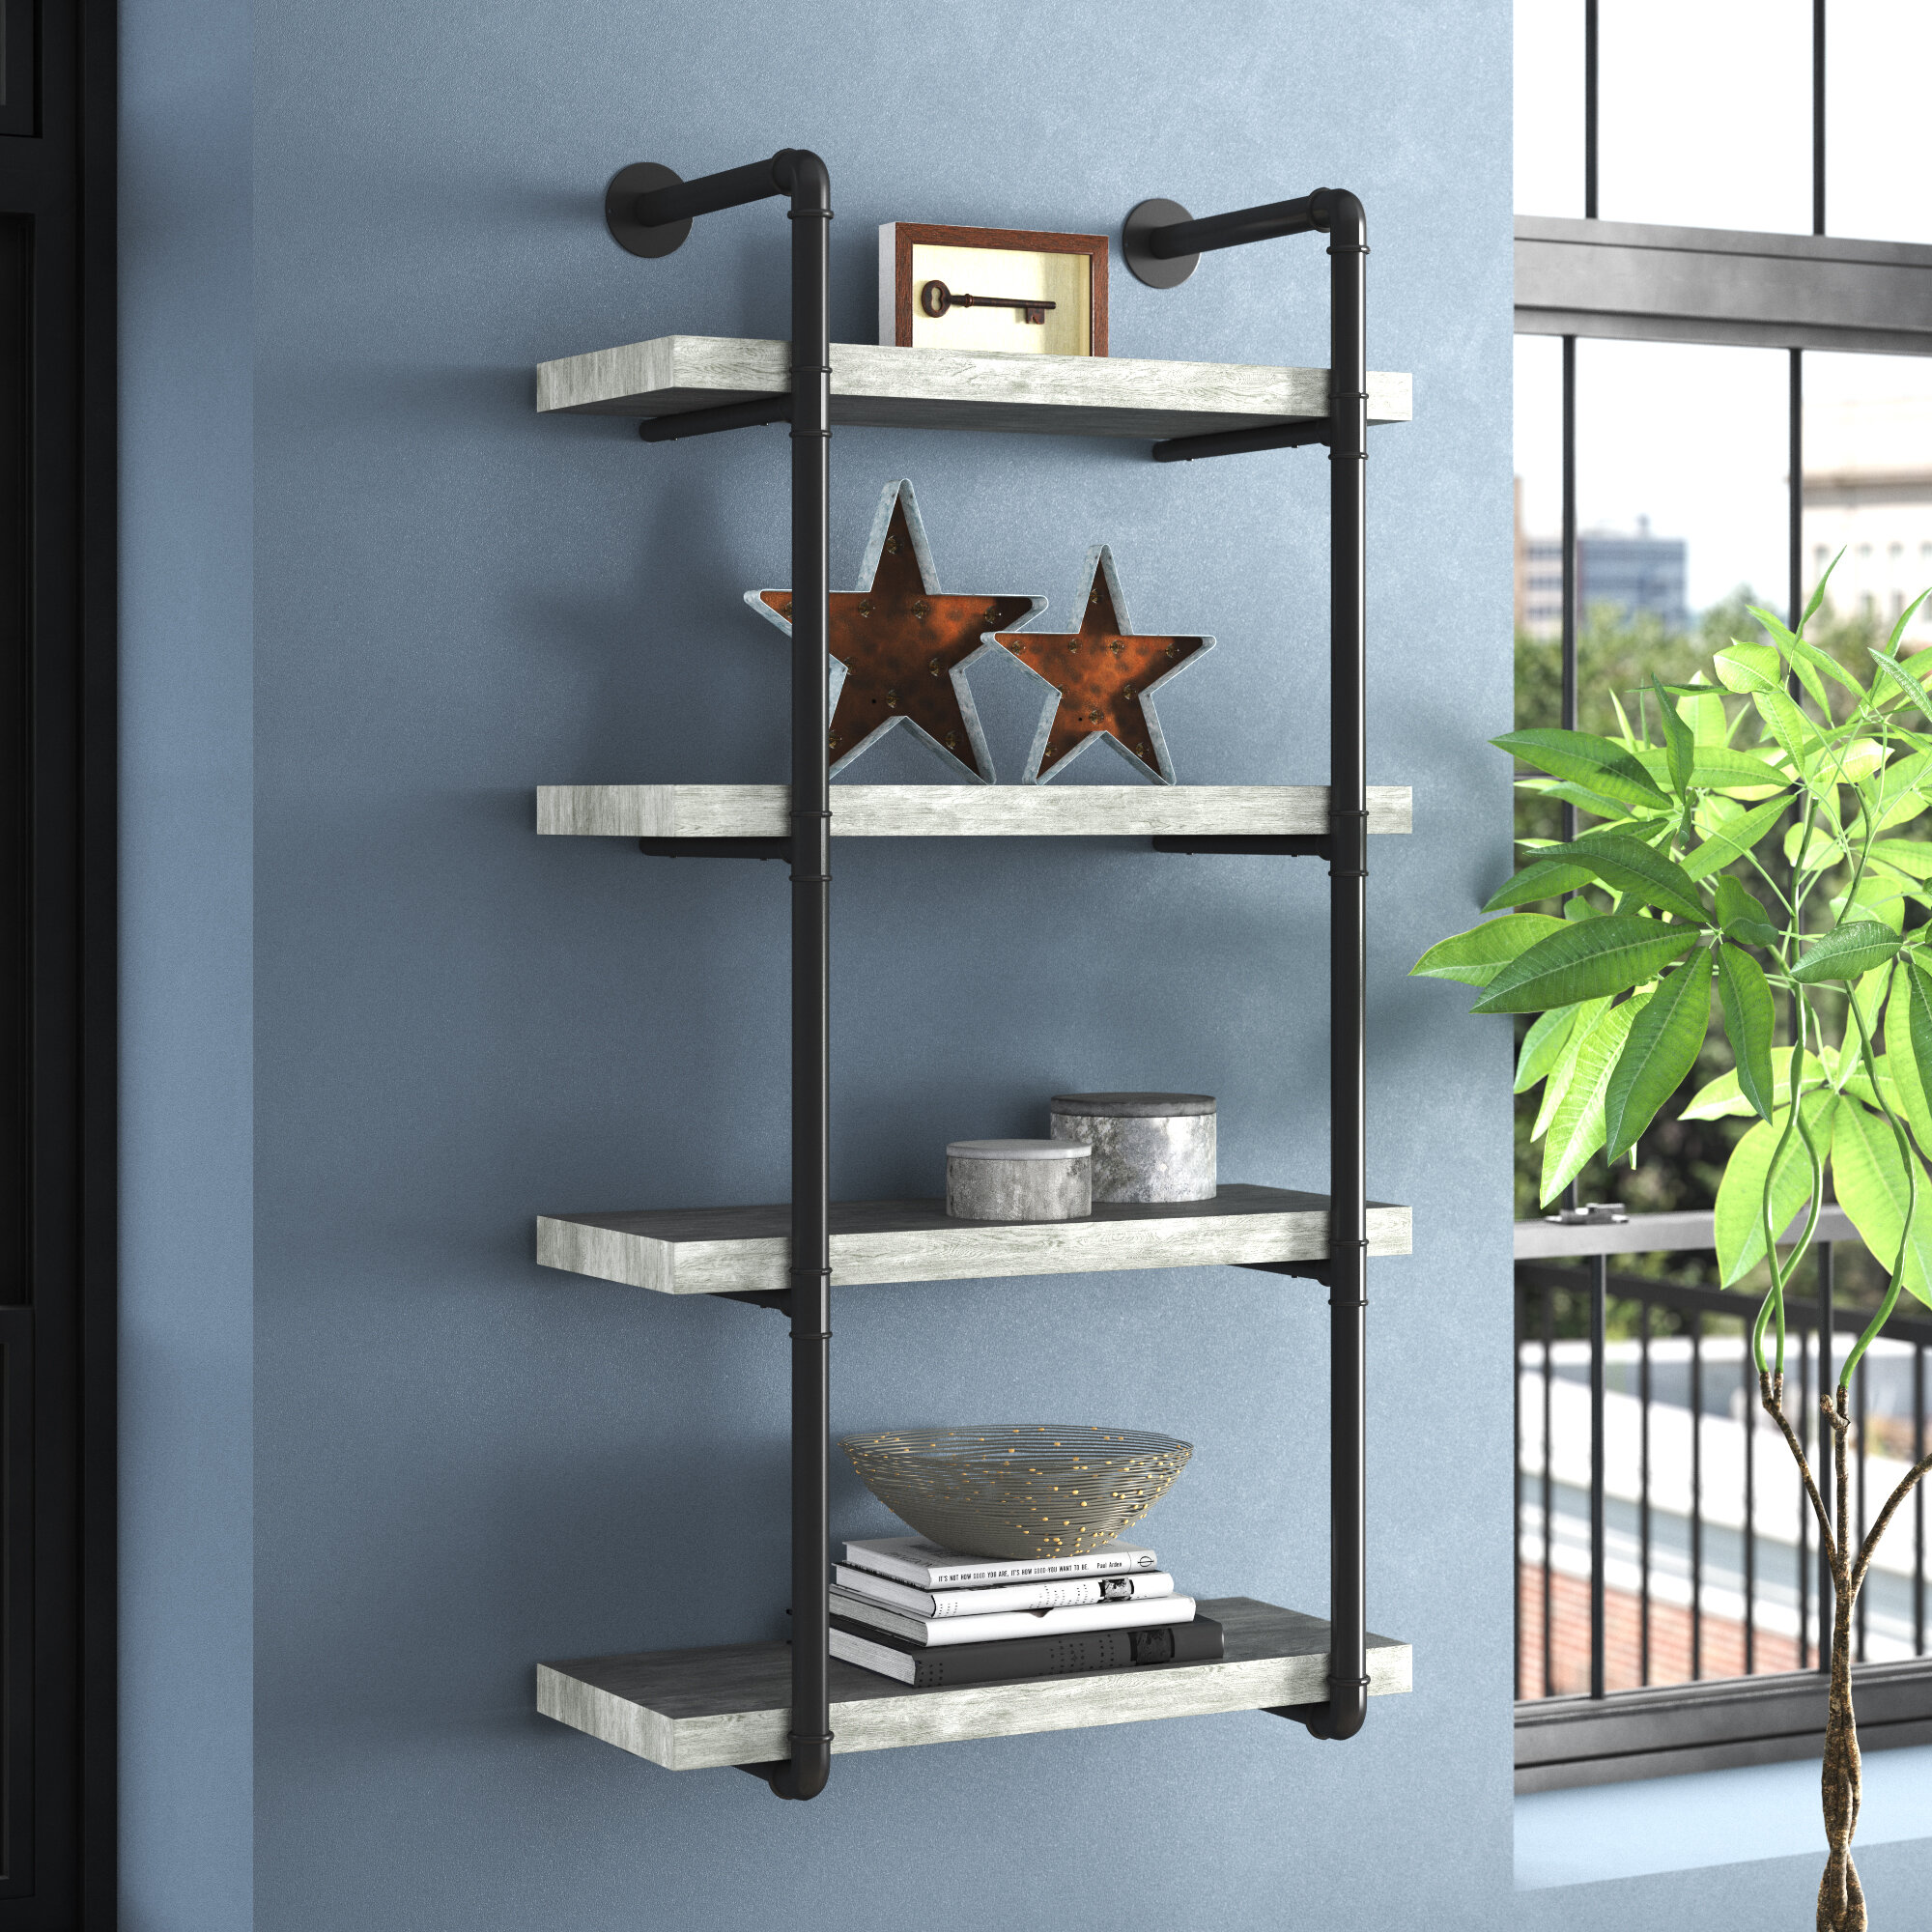 Hanging Metal Wooden Shelves 2-Tier Rustic Style Iron Ceiling Shelf Black Multifunctional Decorative Storage Shelf for Bars/Restaurants/Kitchens Easy to Install Size : 603050cm 